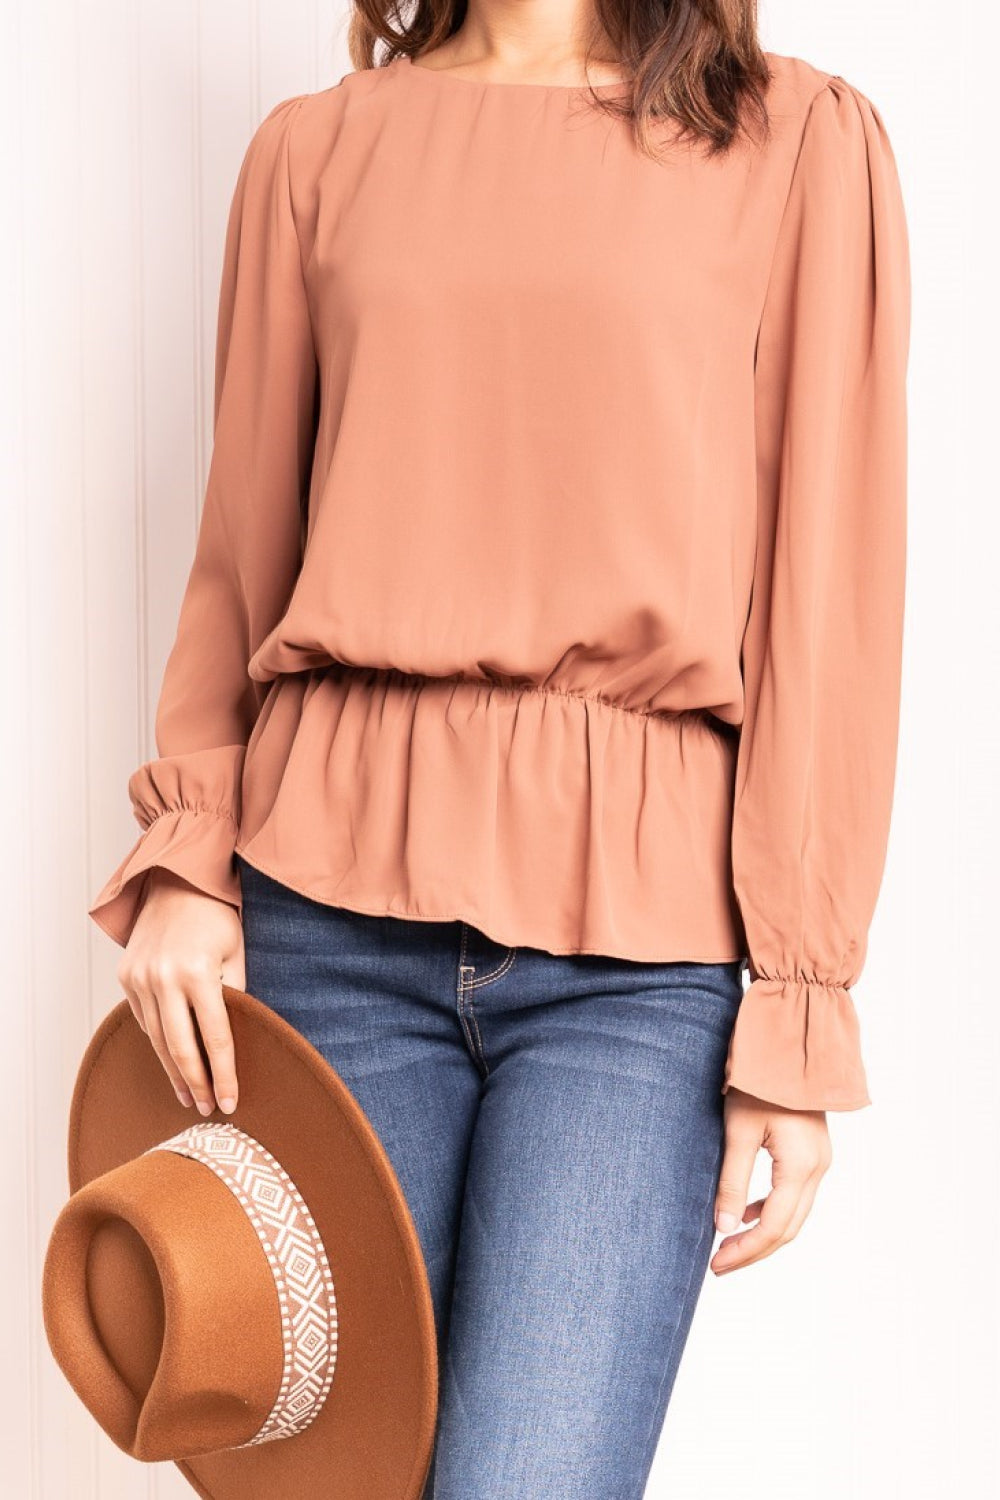 Are You Ready For It Peplum Blouse